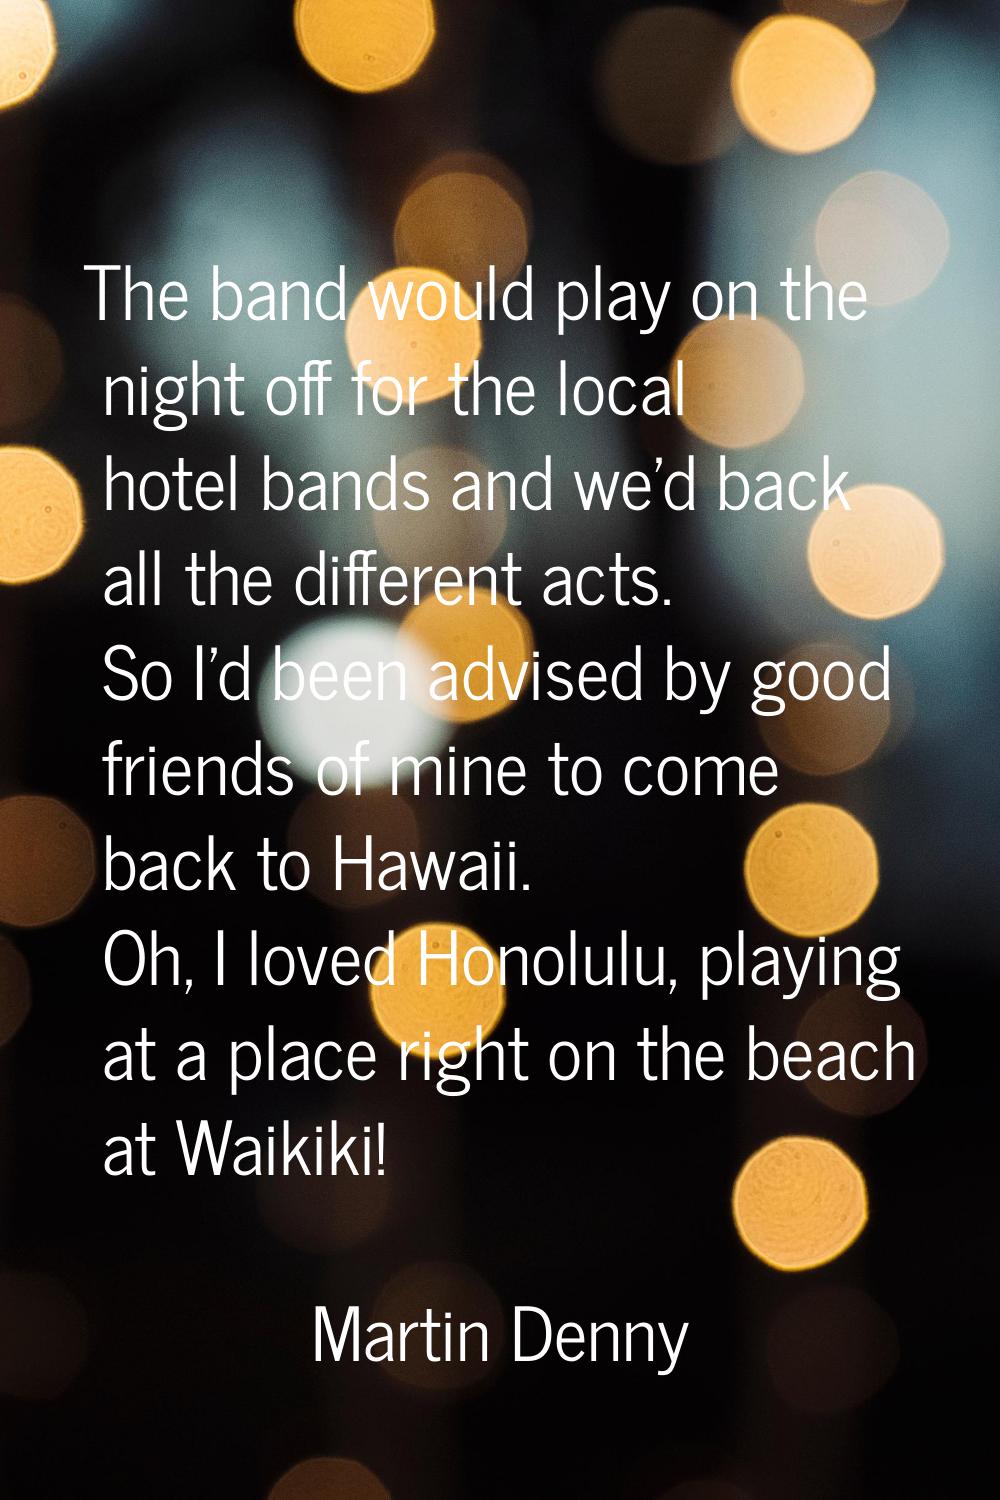 The band would play on the night off for the local hotel bands and we'd back all the different acts